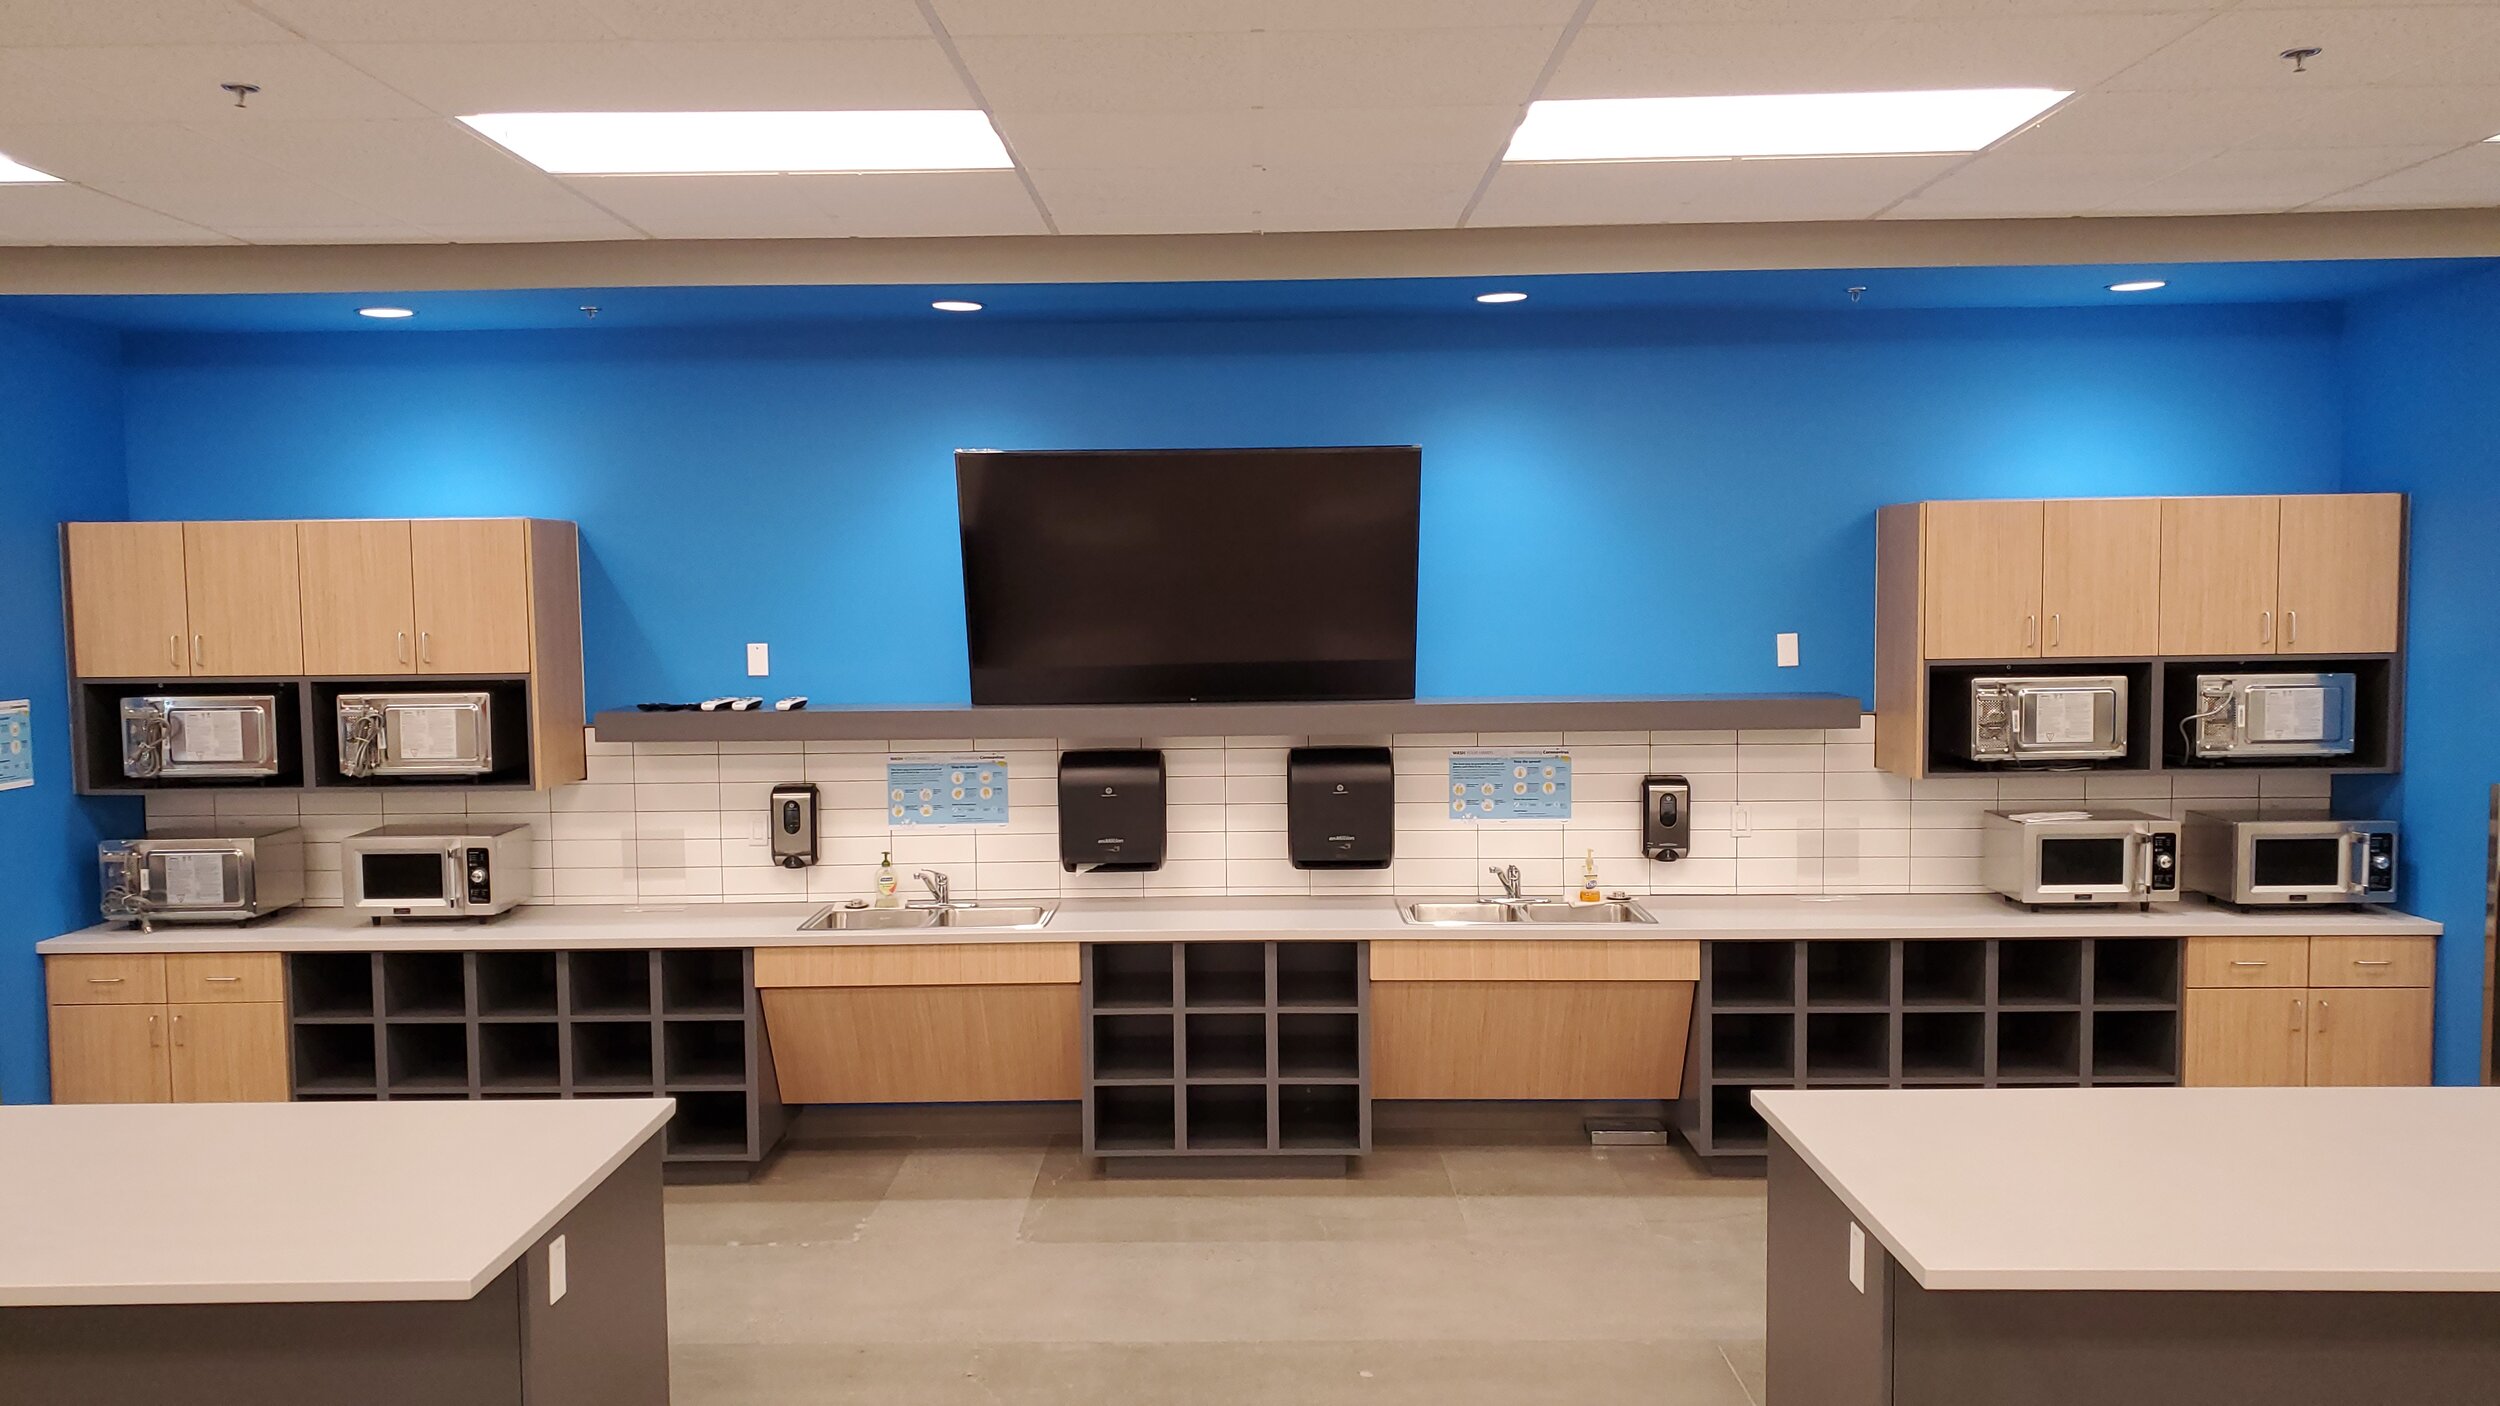 Precision_Custom_Cabinets_San_Diego_Commercial_Cabinetry_Amazon_Warehouse_Breakroom 42.jpg